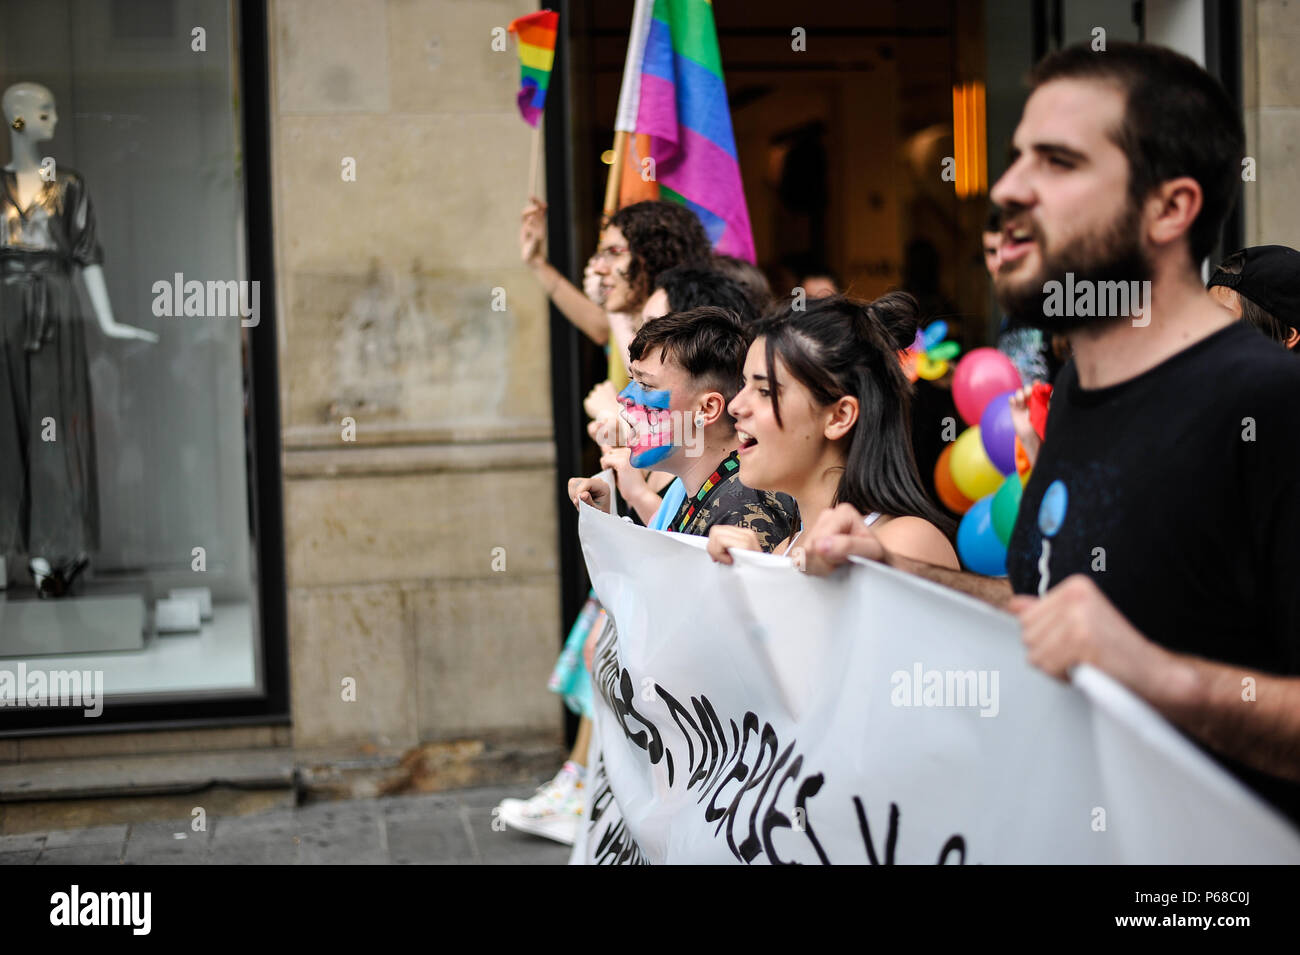 Pamplona, Spain. 28th June, 2018. Participants in the gay pride parade waves flags as thousands of people rally for LGBTQ+ rights in Pamplona, Spain on June 28, 2018 to mark the start of Pride weekend in the city. Credit: Mikel Cia Da Riva/Alamy Live News Stock Photo